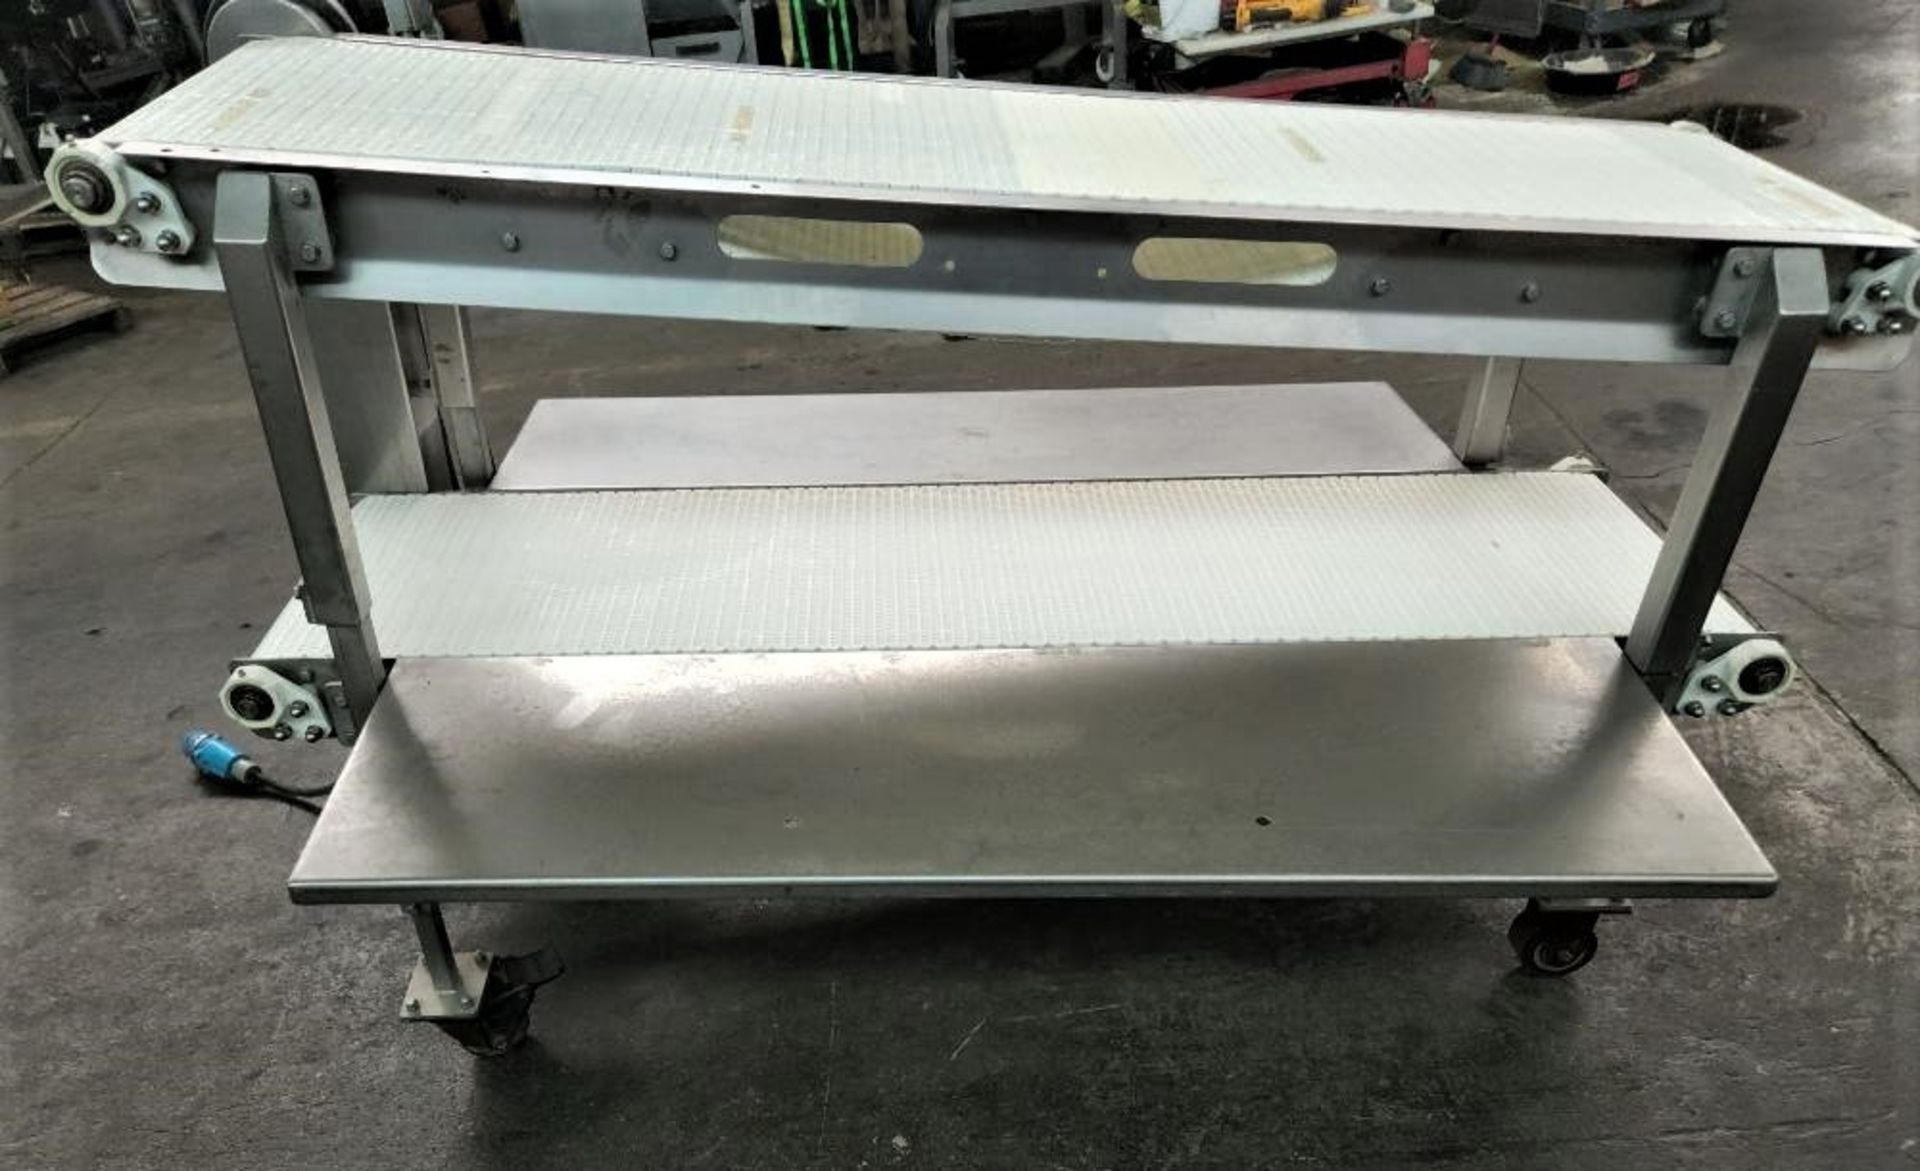 Dual 18" White Intralox Belt Conveyor Pack Off S/S Conveyor, Both Belts are 18" W x 72' Long, Tables - Image 4 of 5